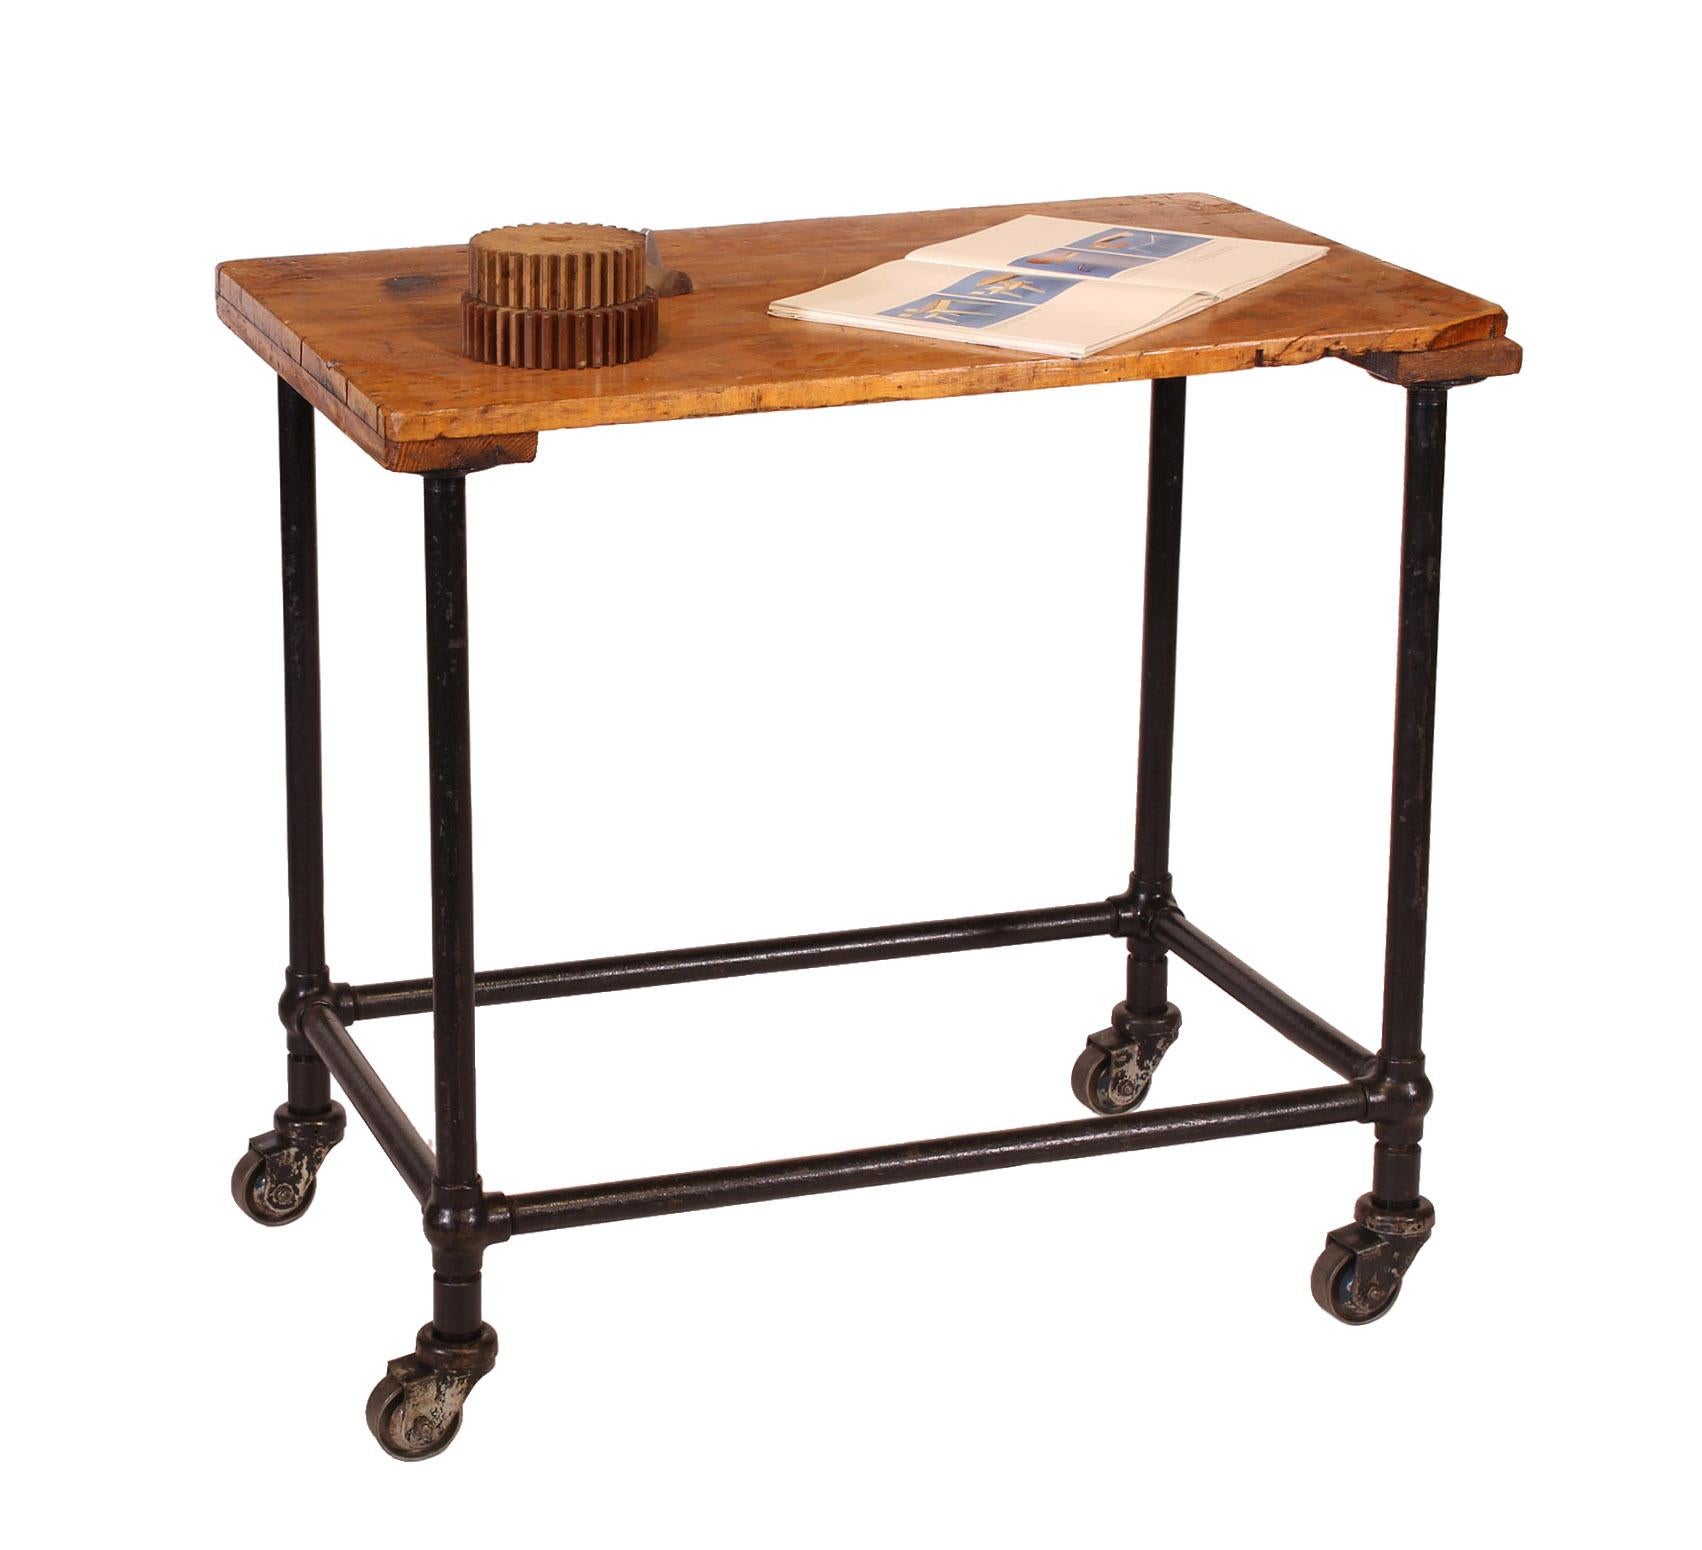 Vintage industrial authentic factory printing cart. Features cast iron bubble joints, steel tubing, cast iron wheels, and maple top on plywood stretchers. Casters read 'Darnell Caster Long Beach CAL. Chicago-New York'. Tabletop measure 1